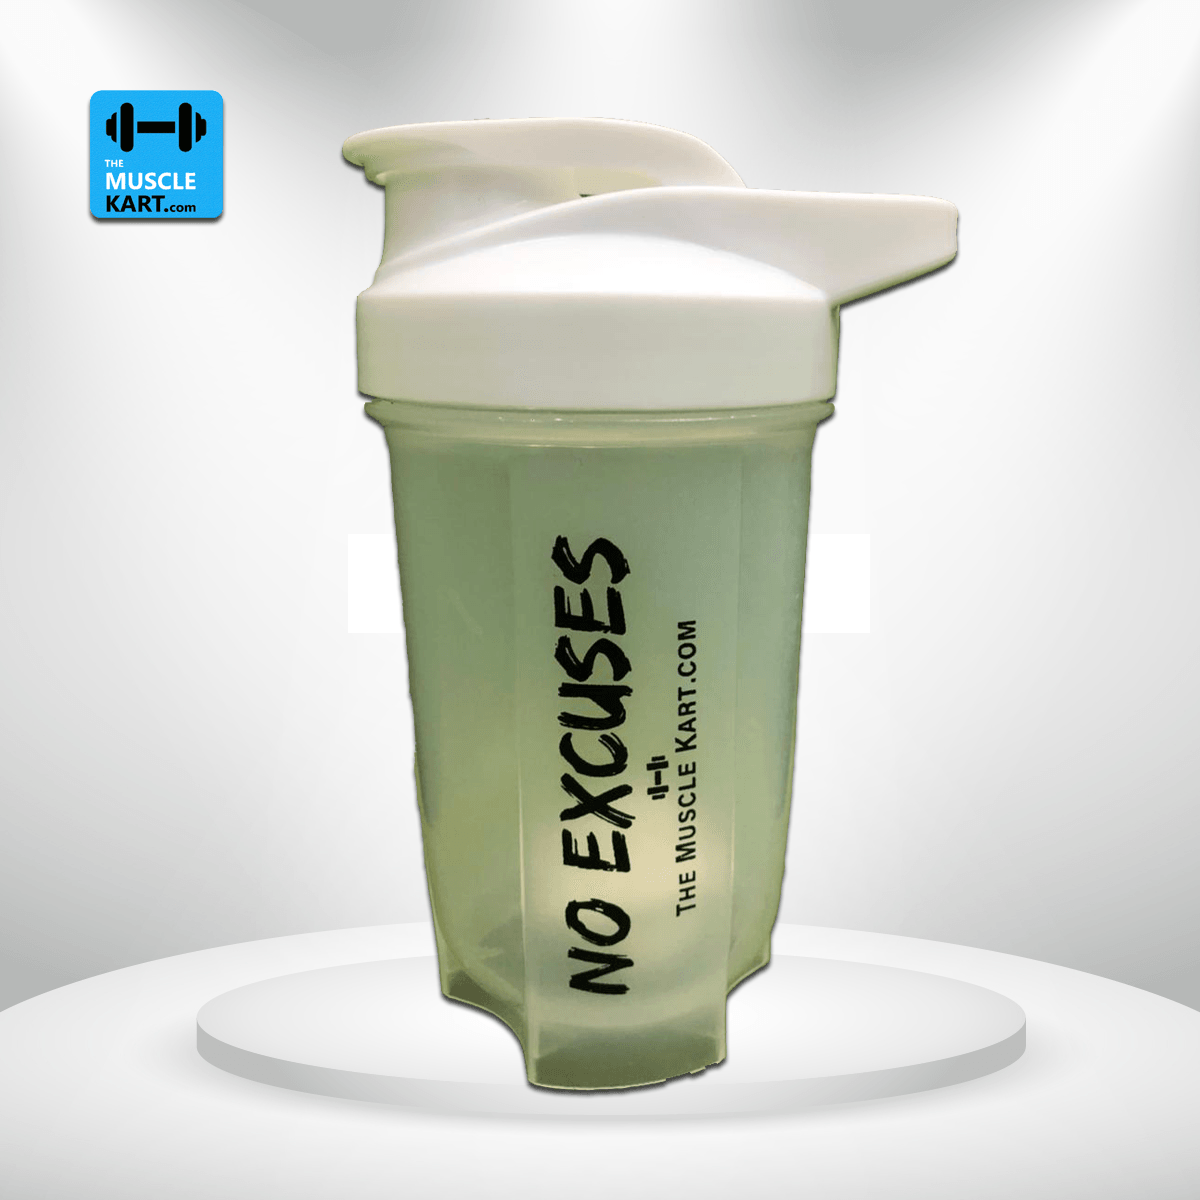 No Excuses White Protein / Gym Shaker 600ml - The Muscle Kart.com